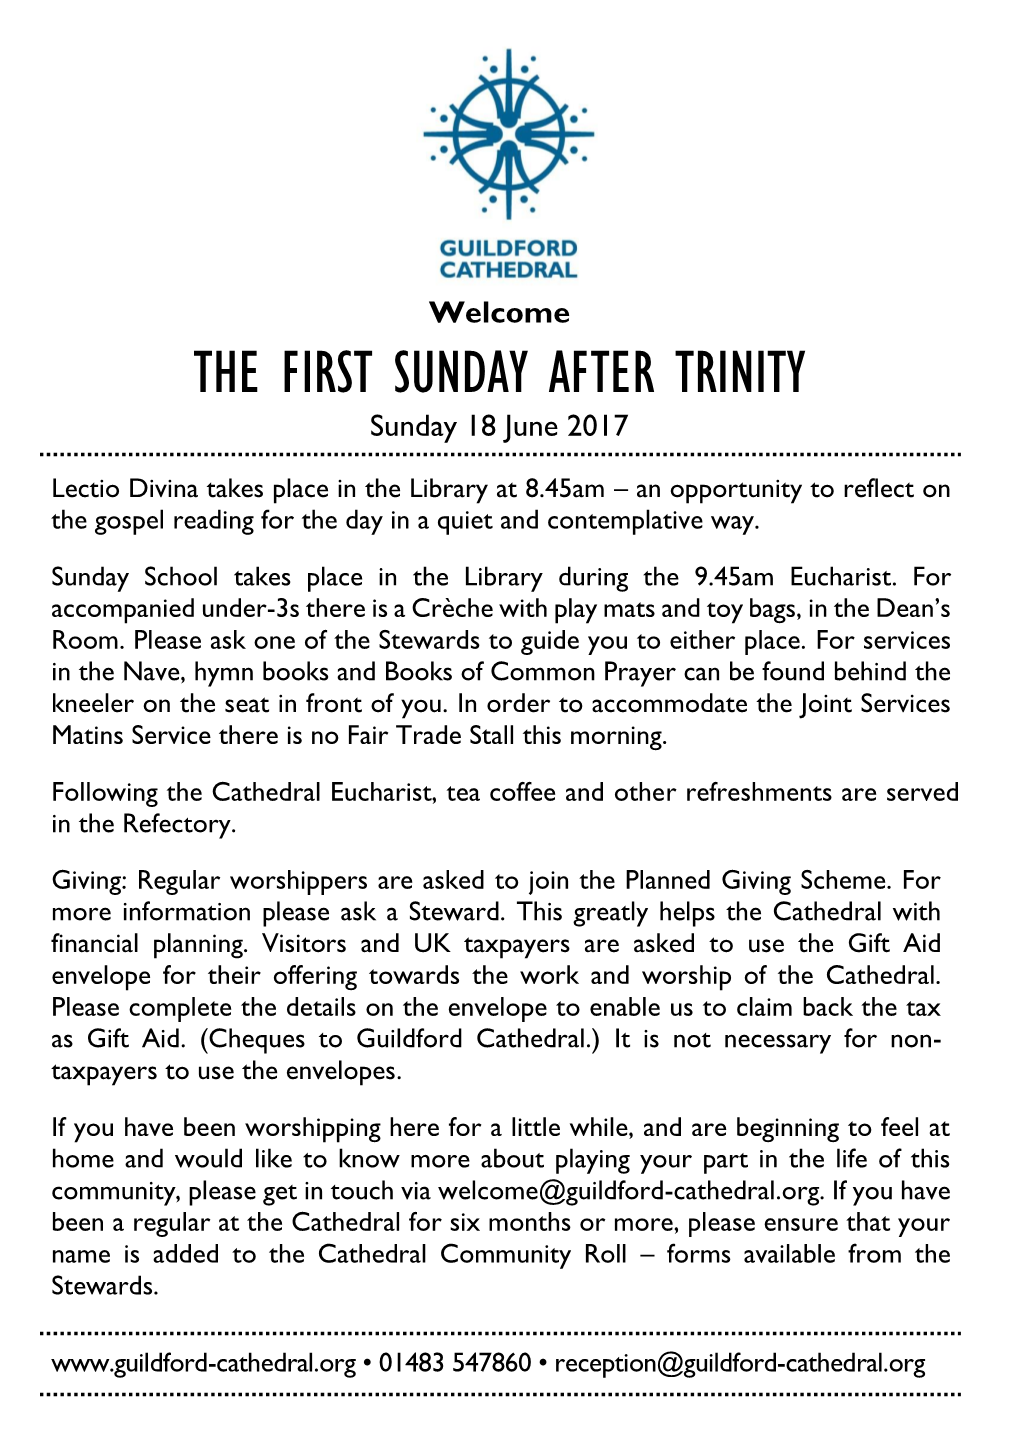 THE FIRST SUNDAY AFTER TRINITY Sunday 18 June 2017